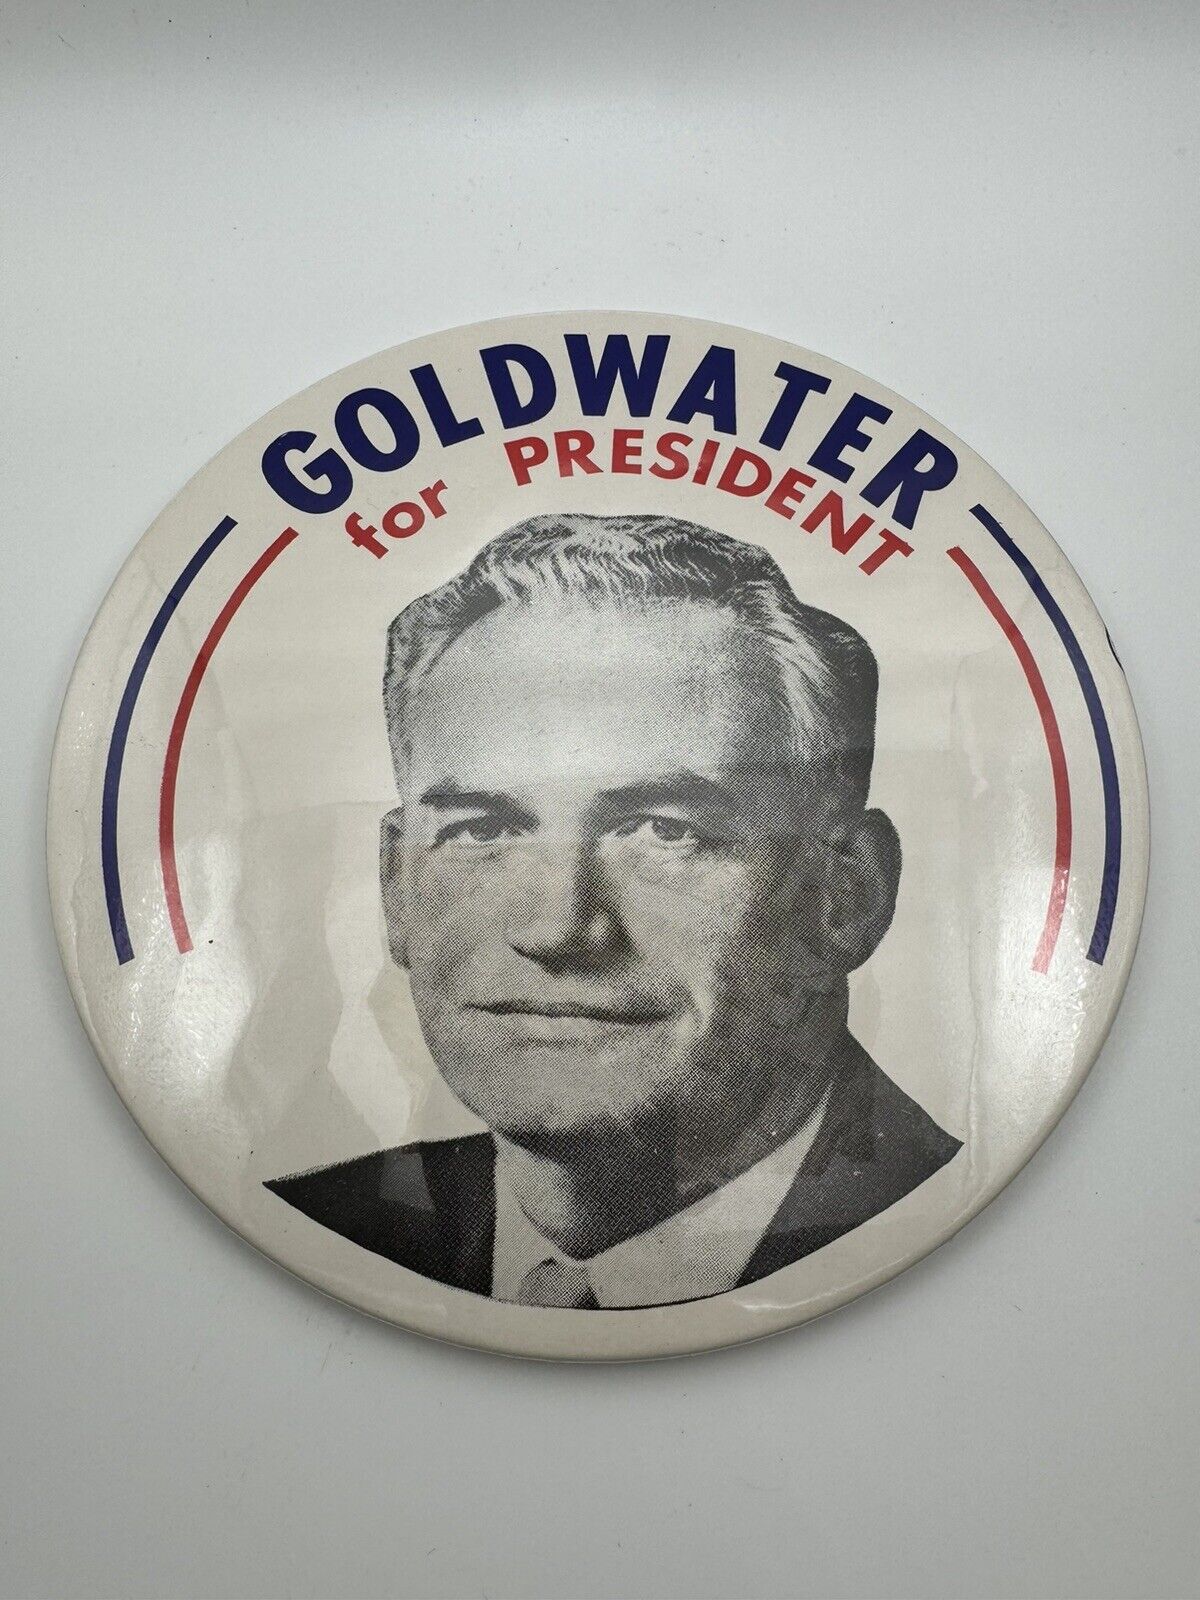 1964 Goldwater for President 7” Campaign Pinback